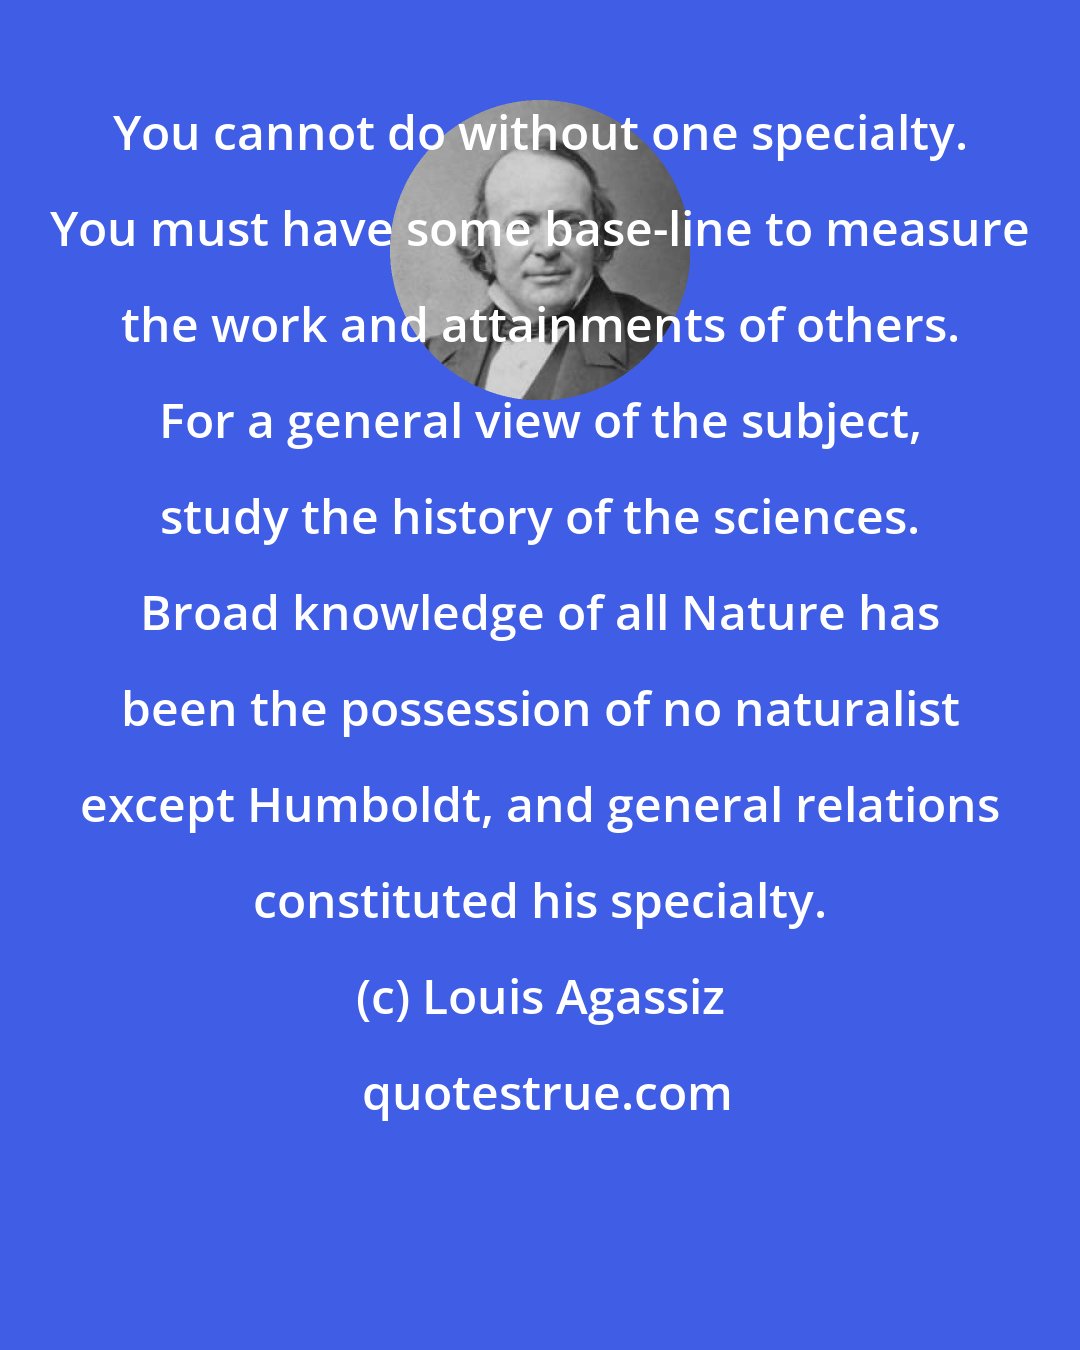 Louis Agassiz: You cannot do without one specialty. You must have some base-line to measure the work and attainments of others. For a general view of the subject, study the history of the sciences. Broad knowledge of all Nature has been the possession of no naturalist except Humboldt, and general relations constituted his specialty.